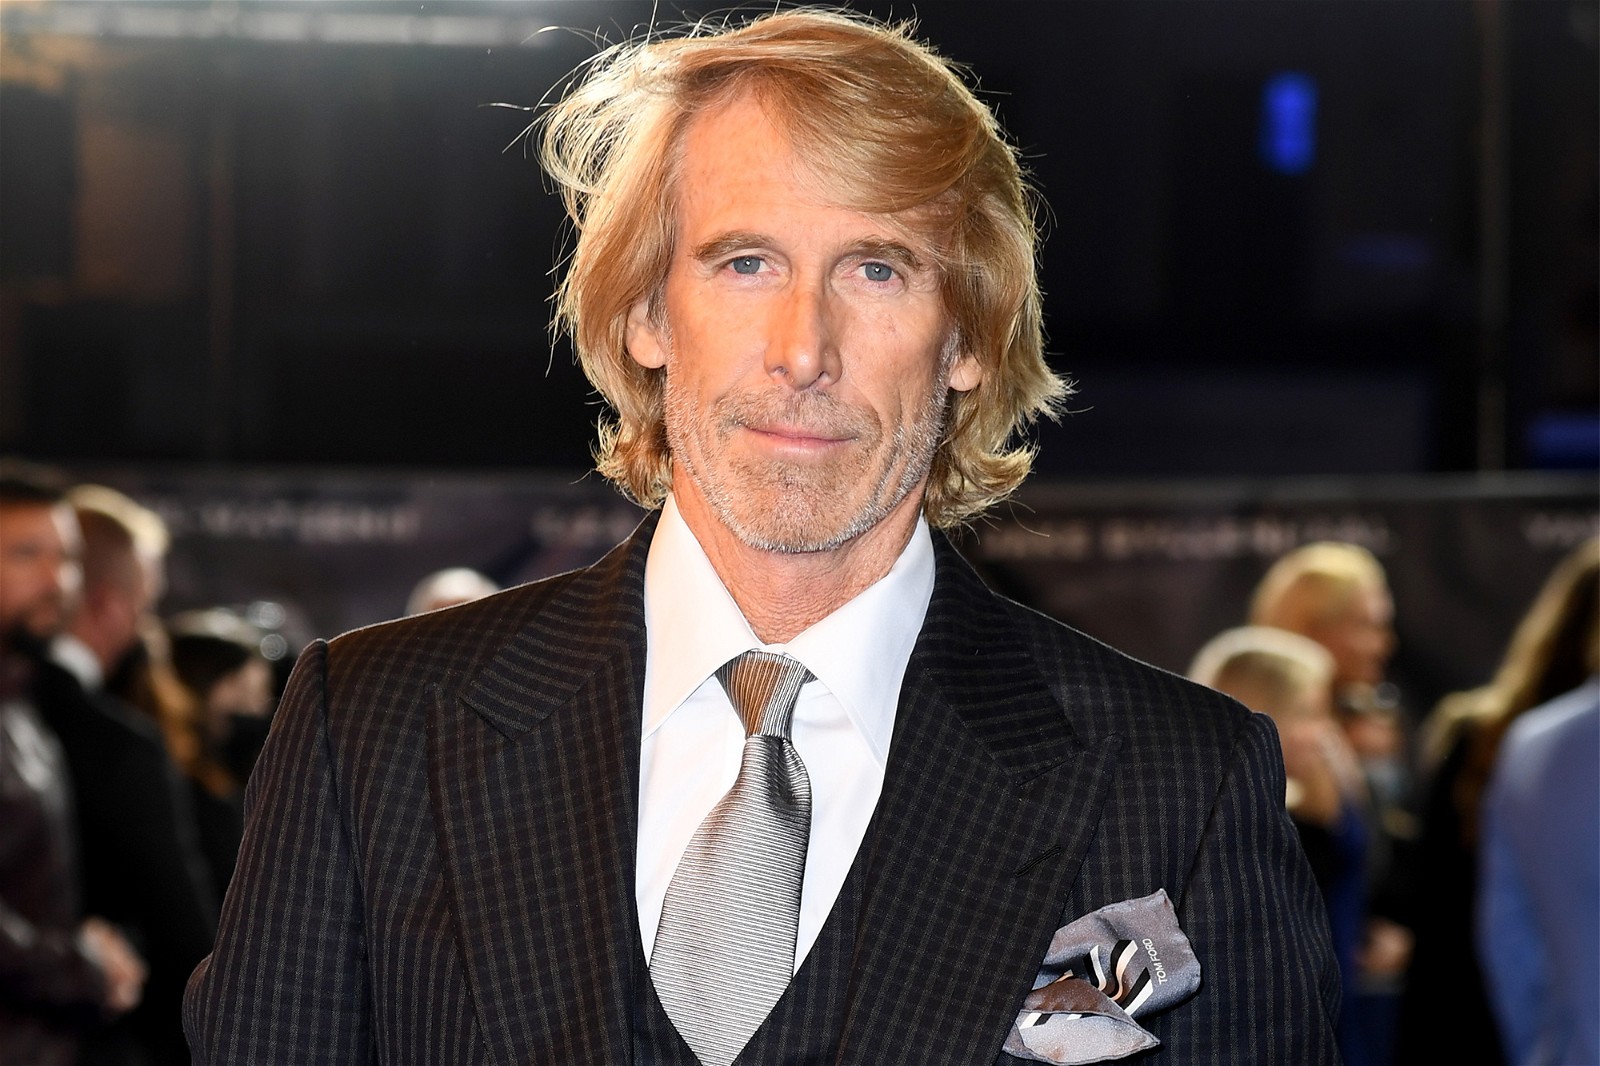 Michael Bay denies the allegations.